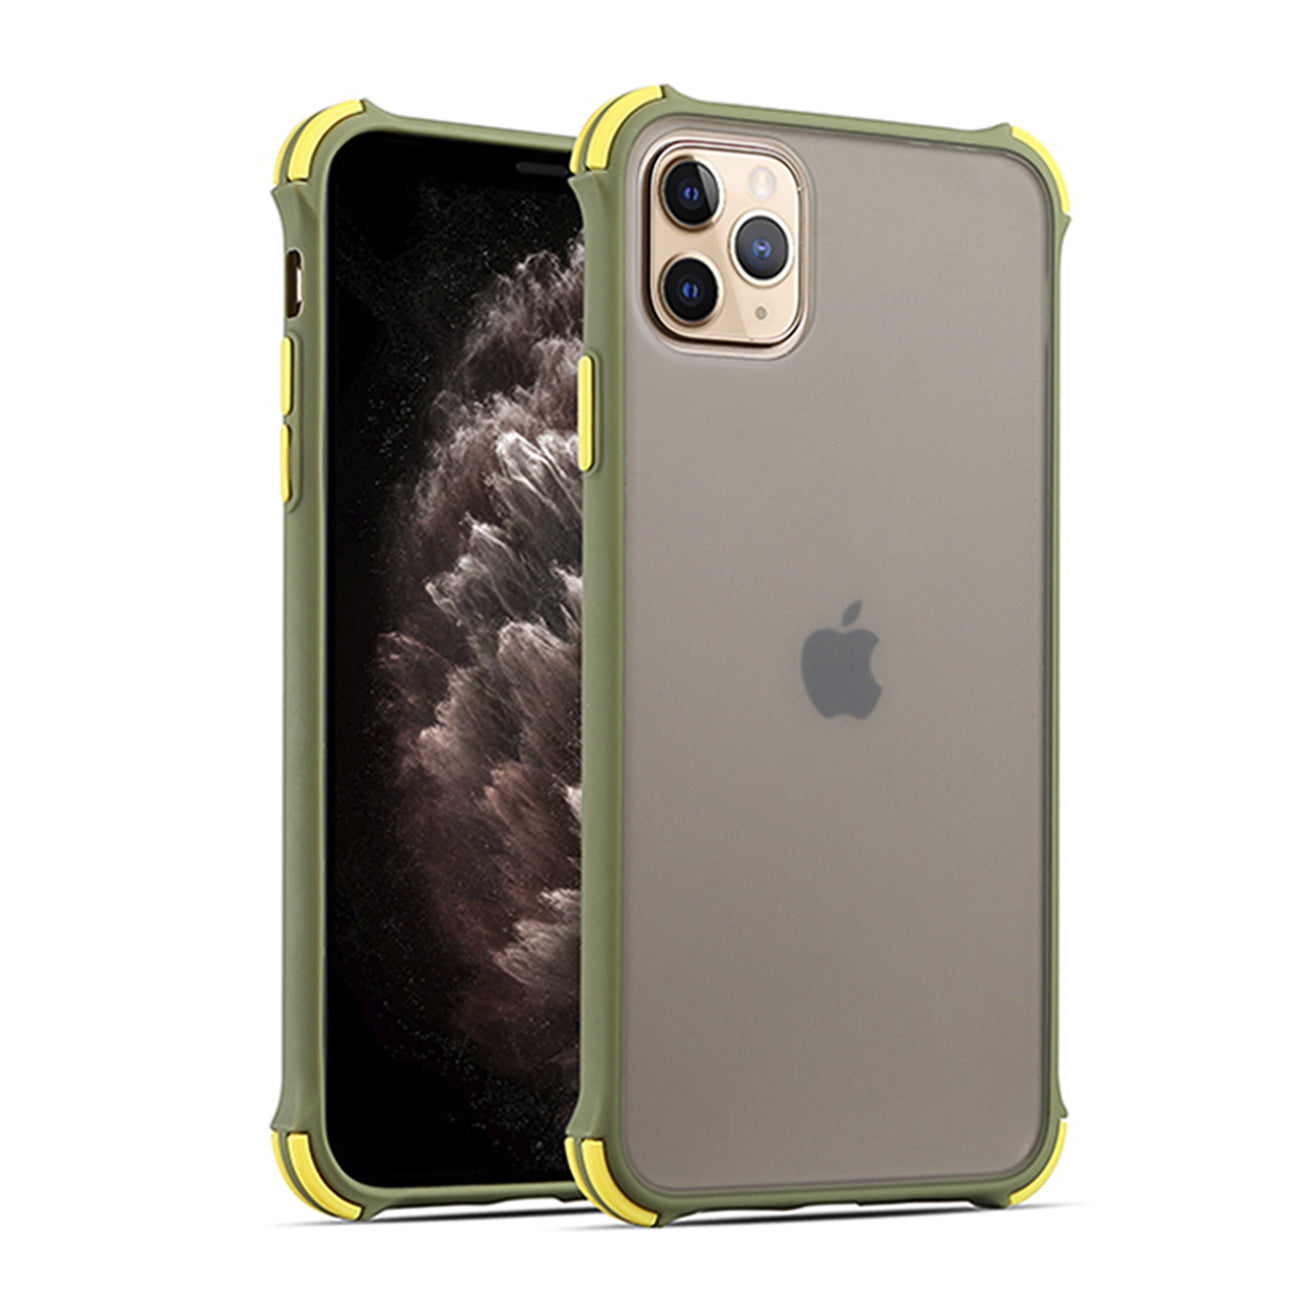 Reiko Bumper Case For APPLE IPHONE 11 In Yellow